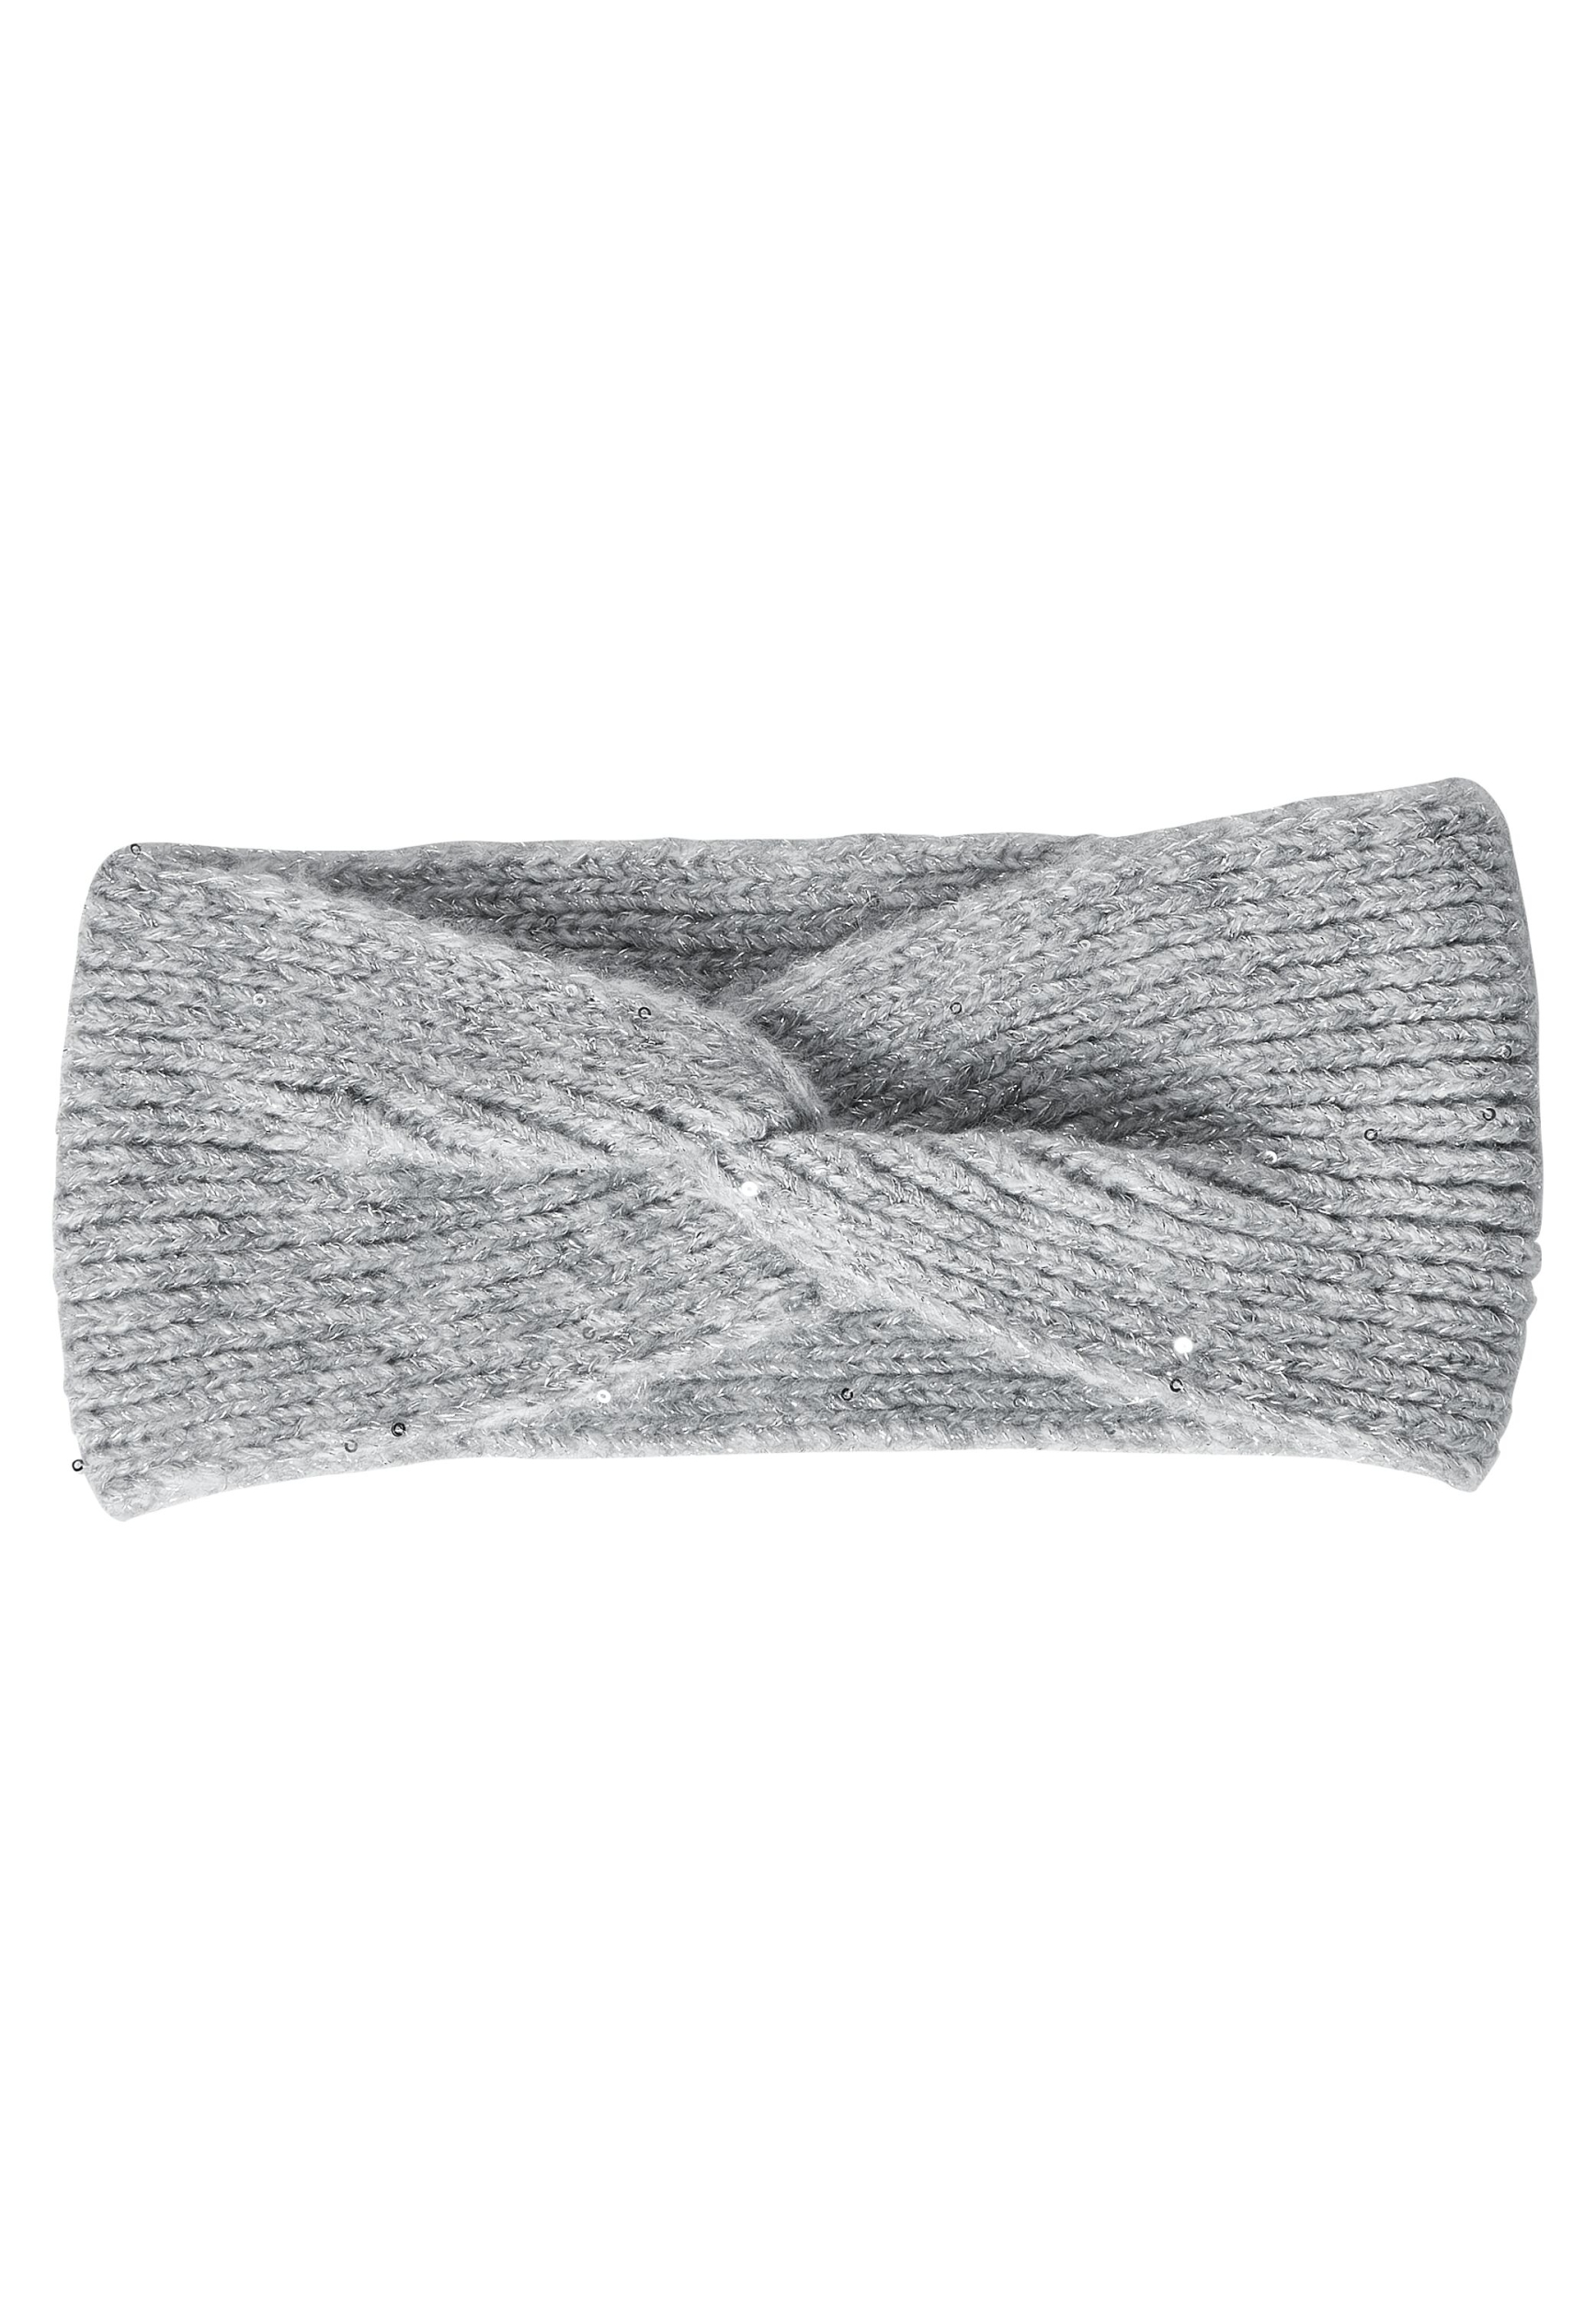 SIZE | grey Headband and Knit ONE B572287-10327-A | mineral | Lurex Sequin melange